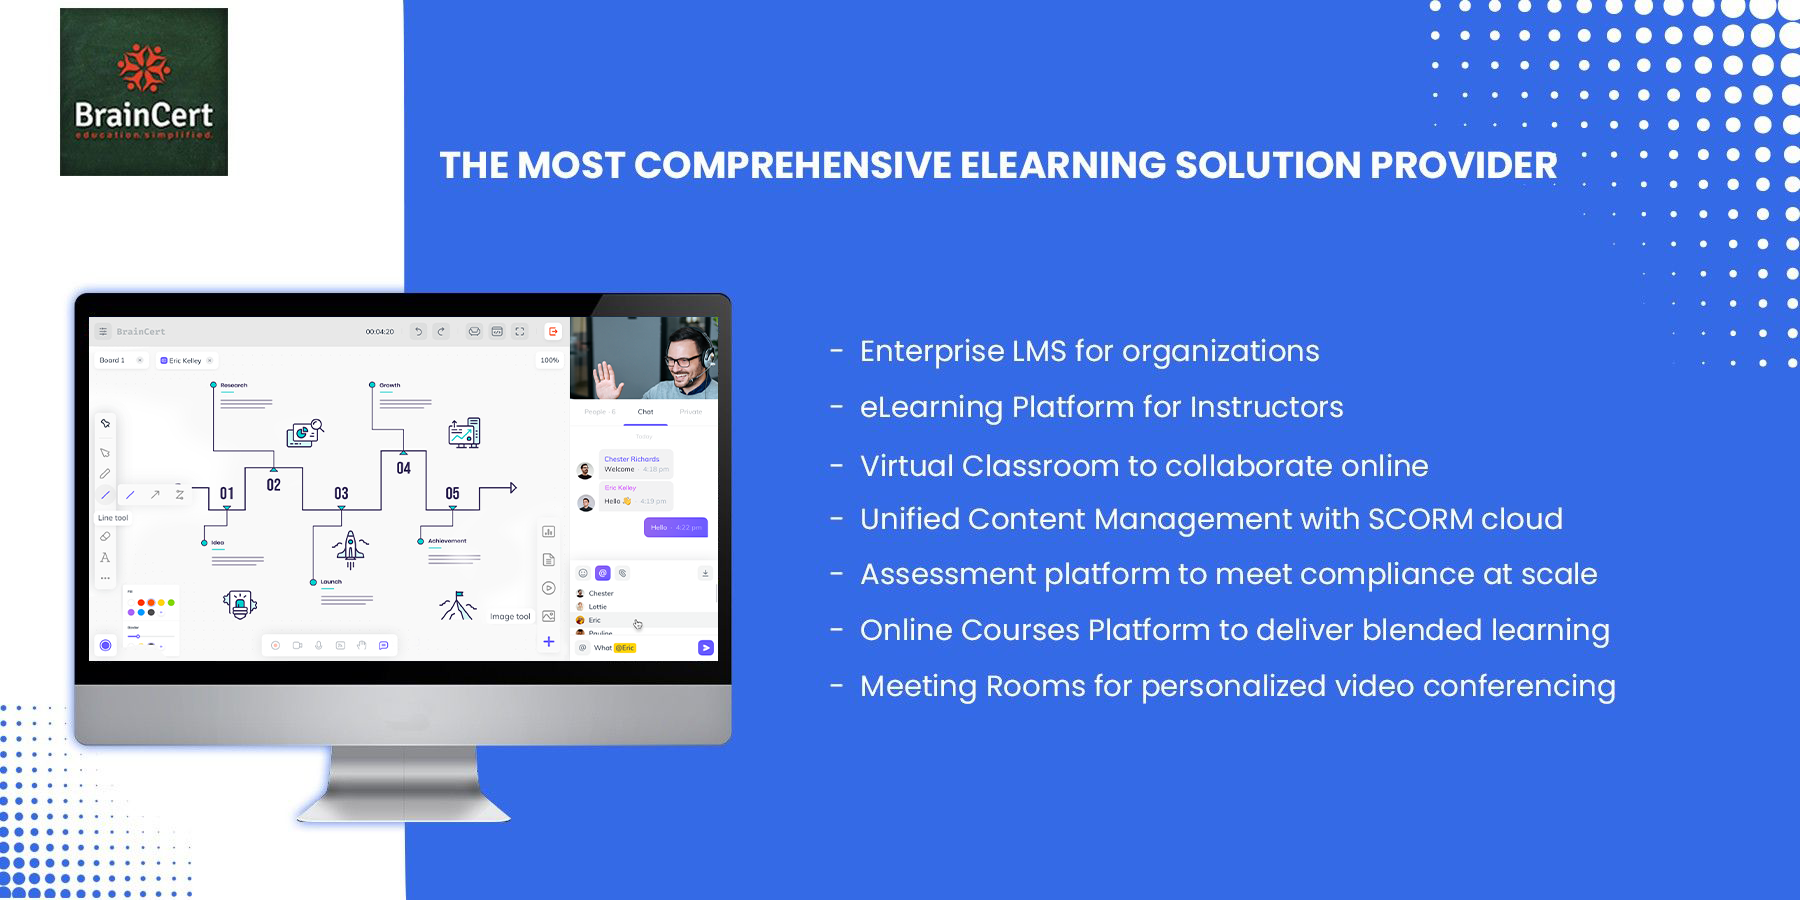 BrainCert Software - BrainCert offers all the essential building blocks to create a robust and cost-effective eLearning ecosystem in the cloud without worrying about scalability, performance and security posture.